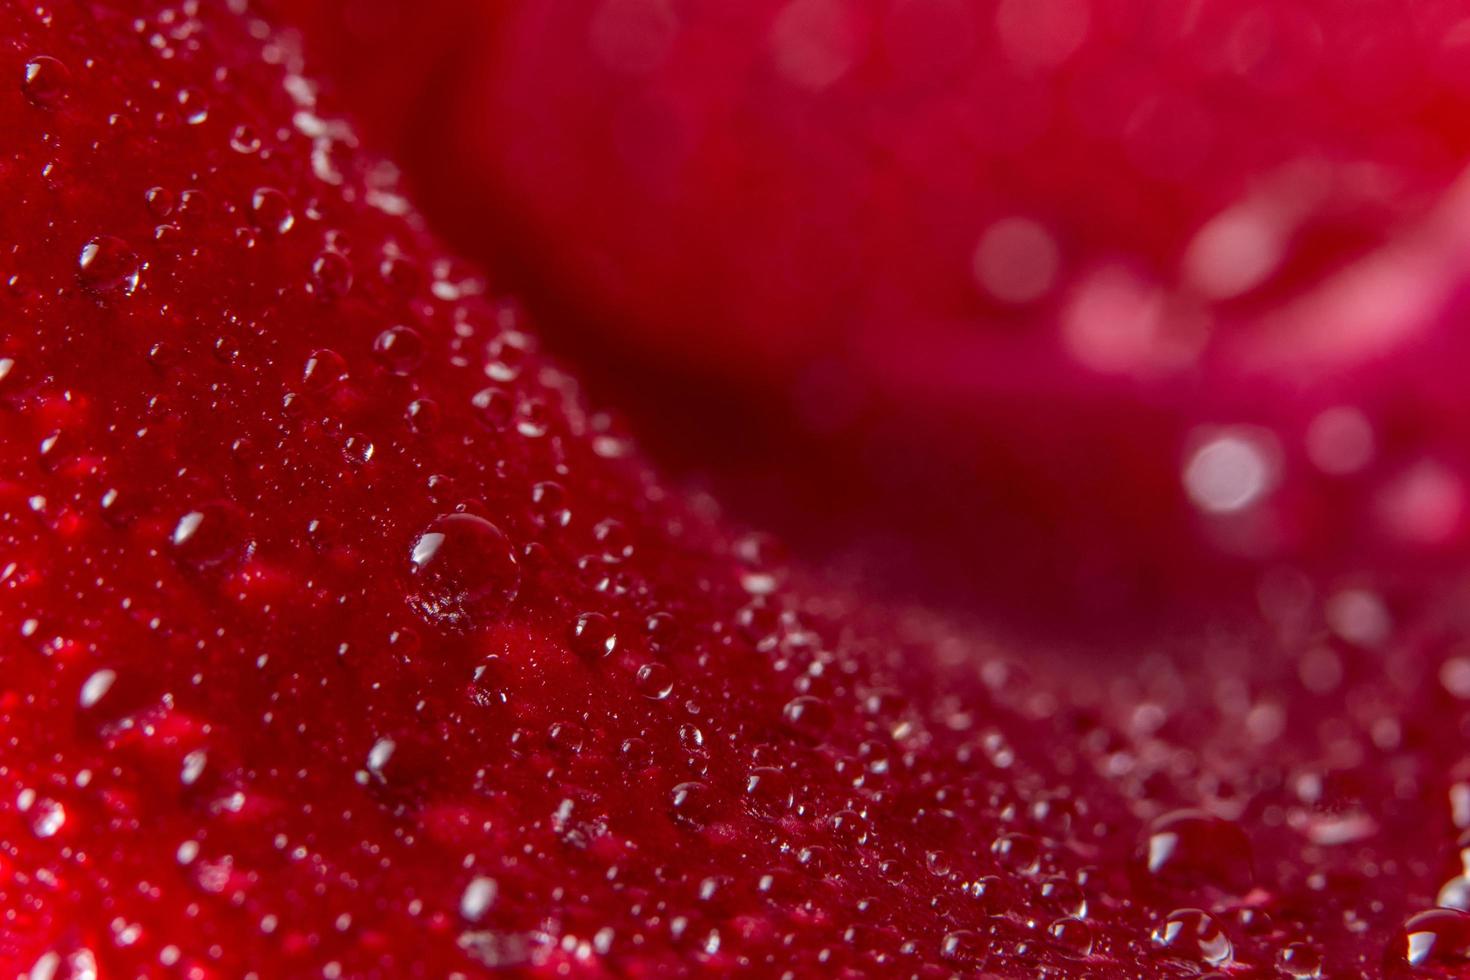 Water drops on a red rose photo